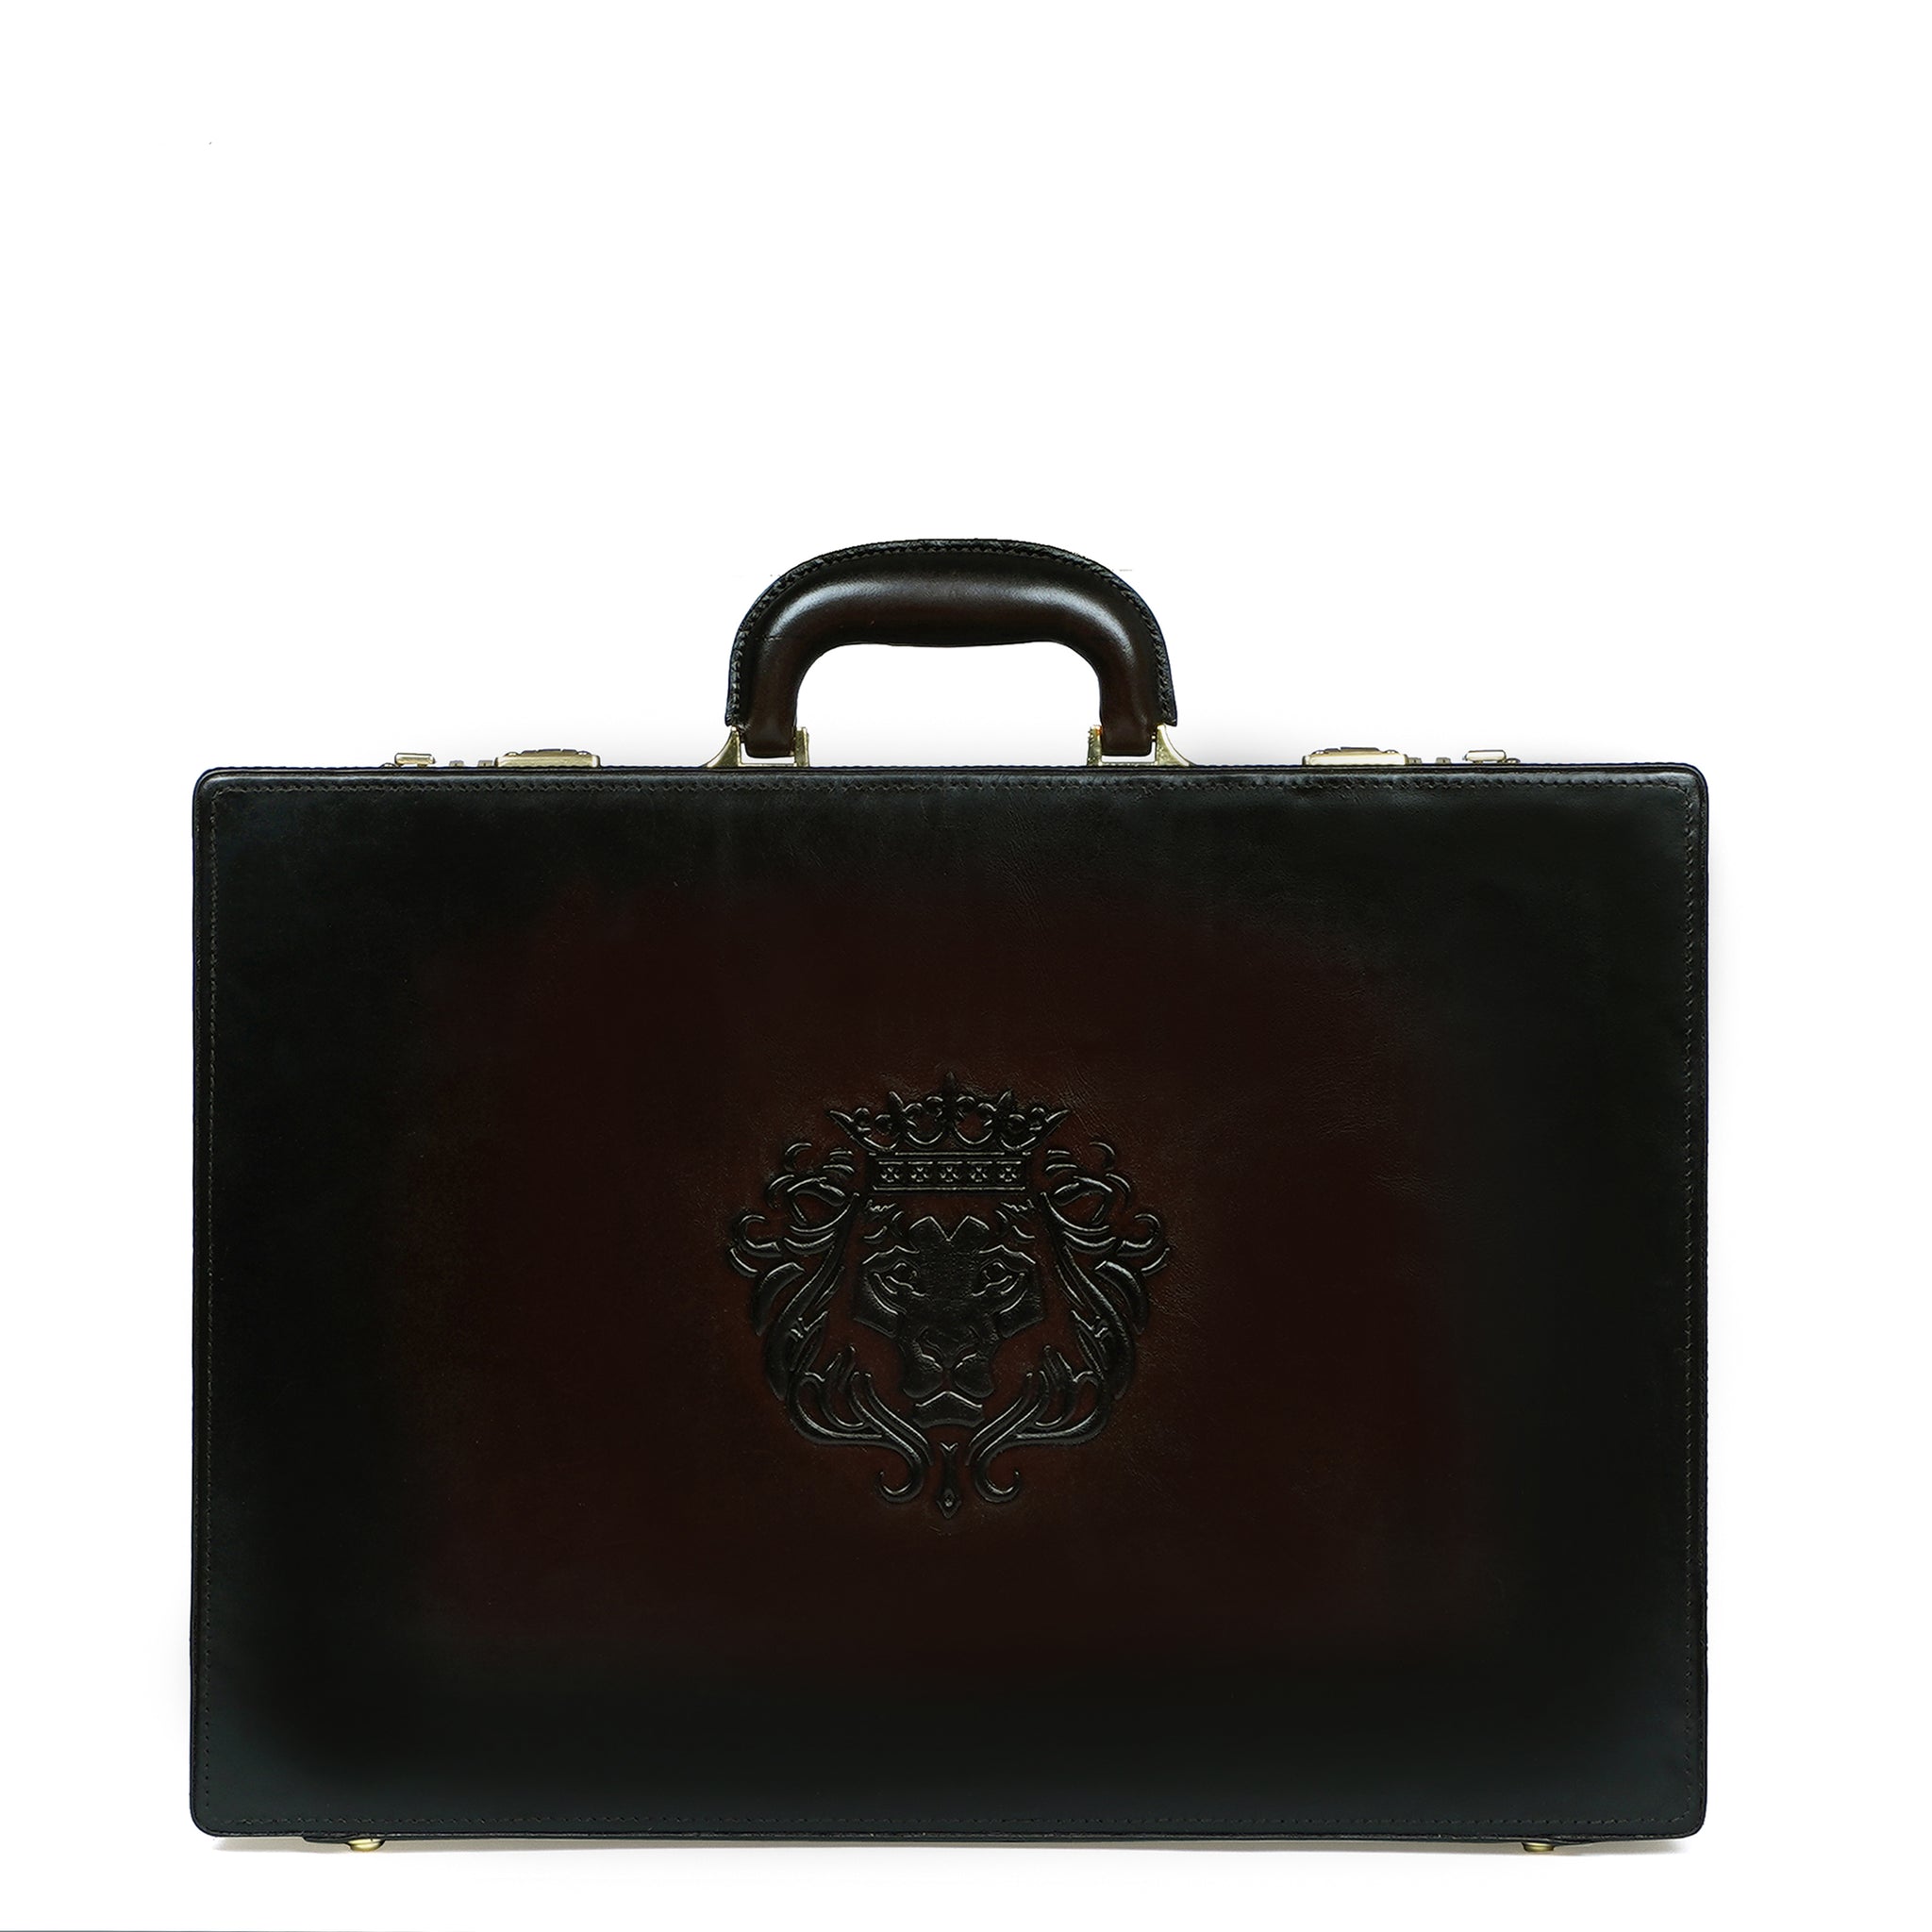 Hand Painted Office Briefcase In Dark Brown Leather Hard Case With Number Lock